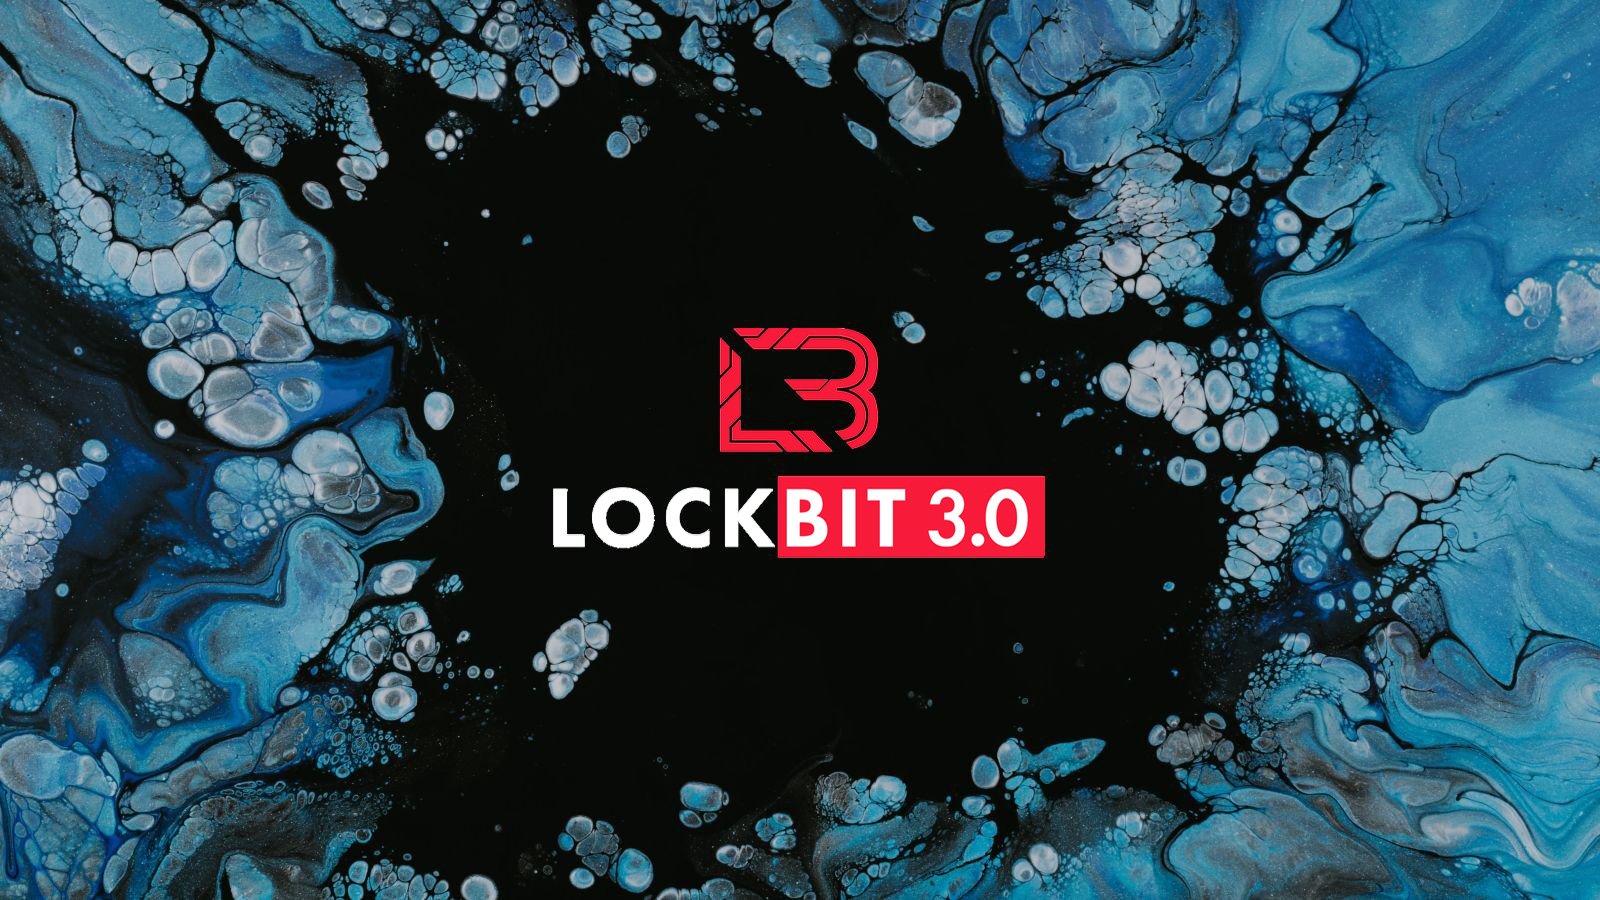 The LockBit ransomware operation has suffered a breach, with an allegedly disgruntled developer leaking the builder for the gang's newest encryptor. I